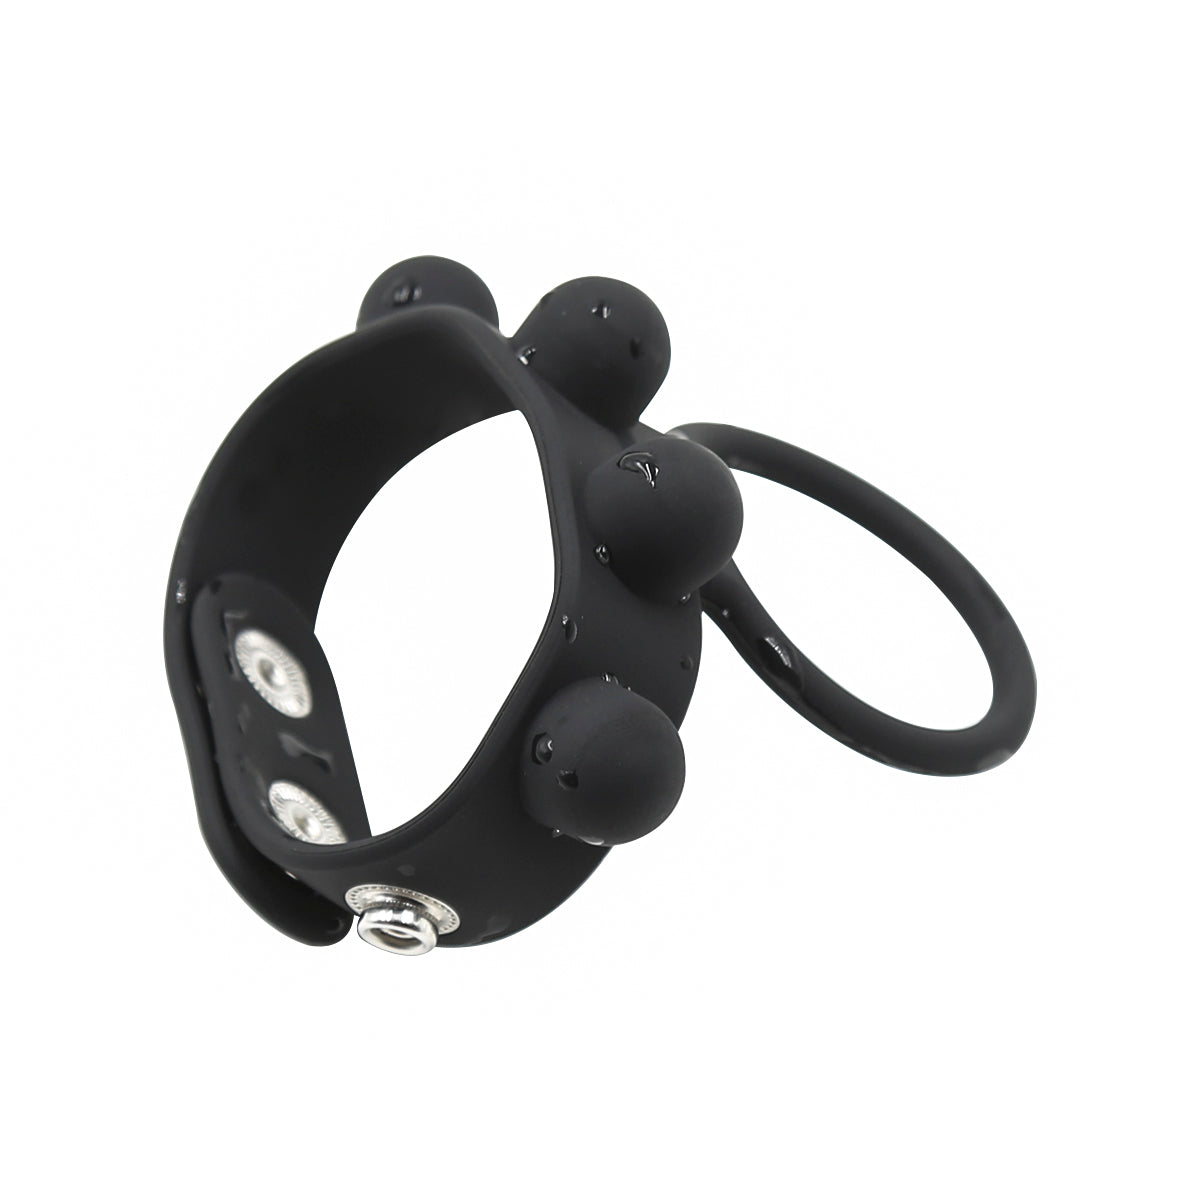 Silicone Cock Ring and Adjustable Scrotum Cuff